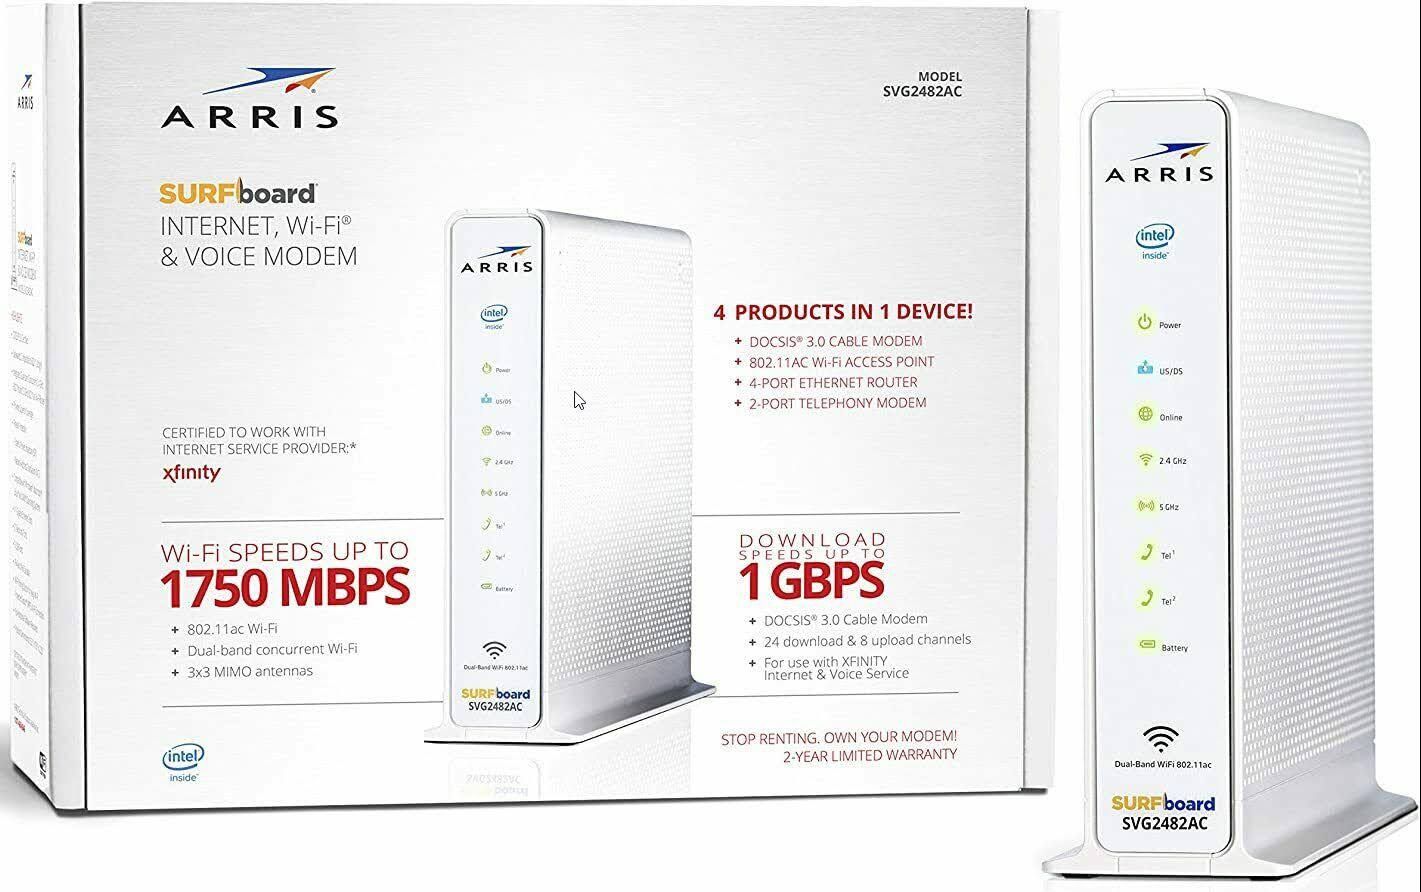 ARRIS SURFboard SVG2482AC DOCSIS 3.0 Cable Modem & AC1750 Dual-Band WiFi Router